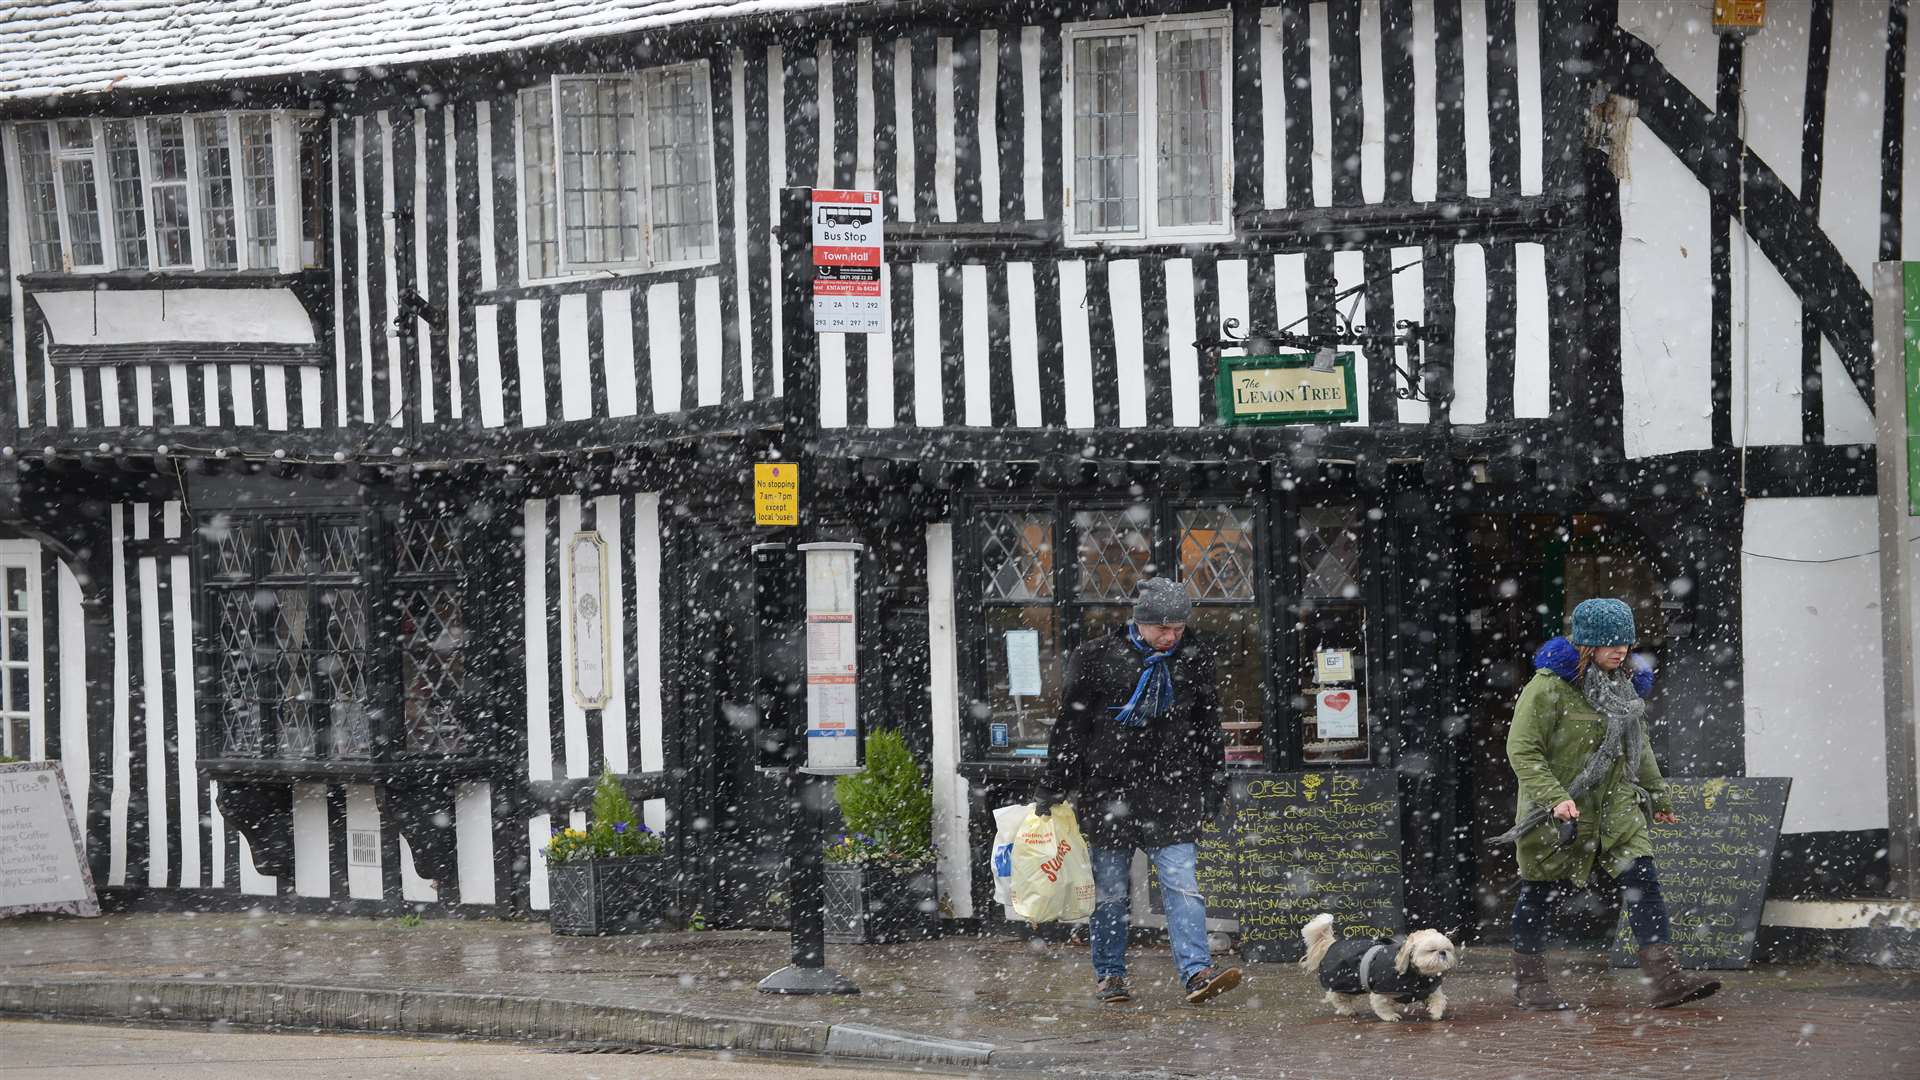 Shoppers battling wintery conditions and freezing temperatures in Tenterden